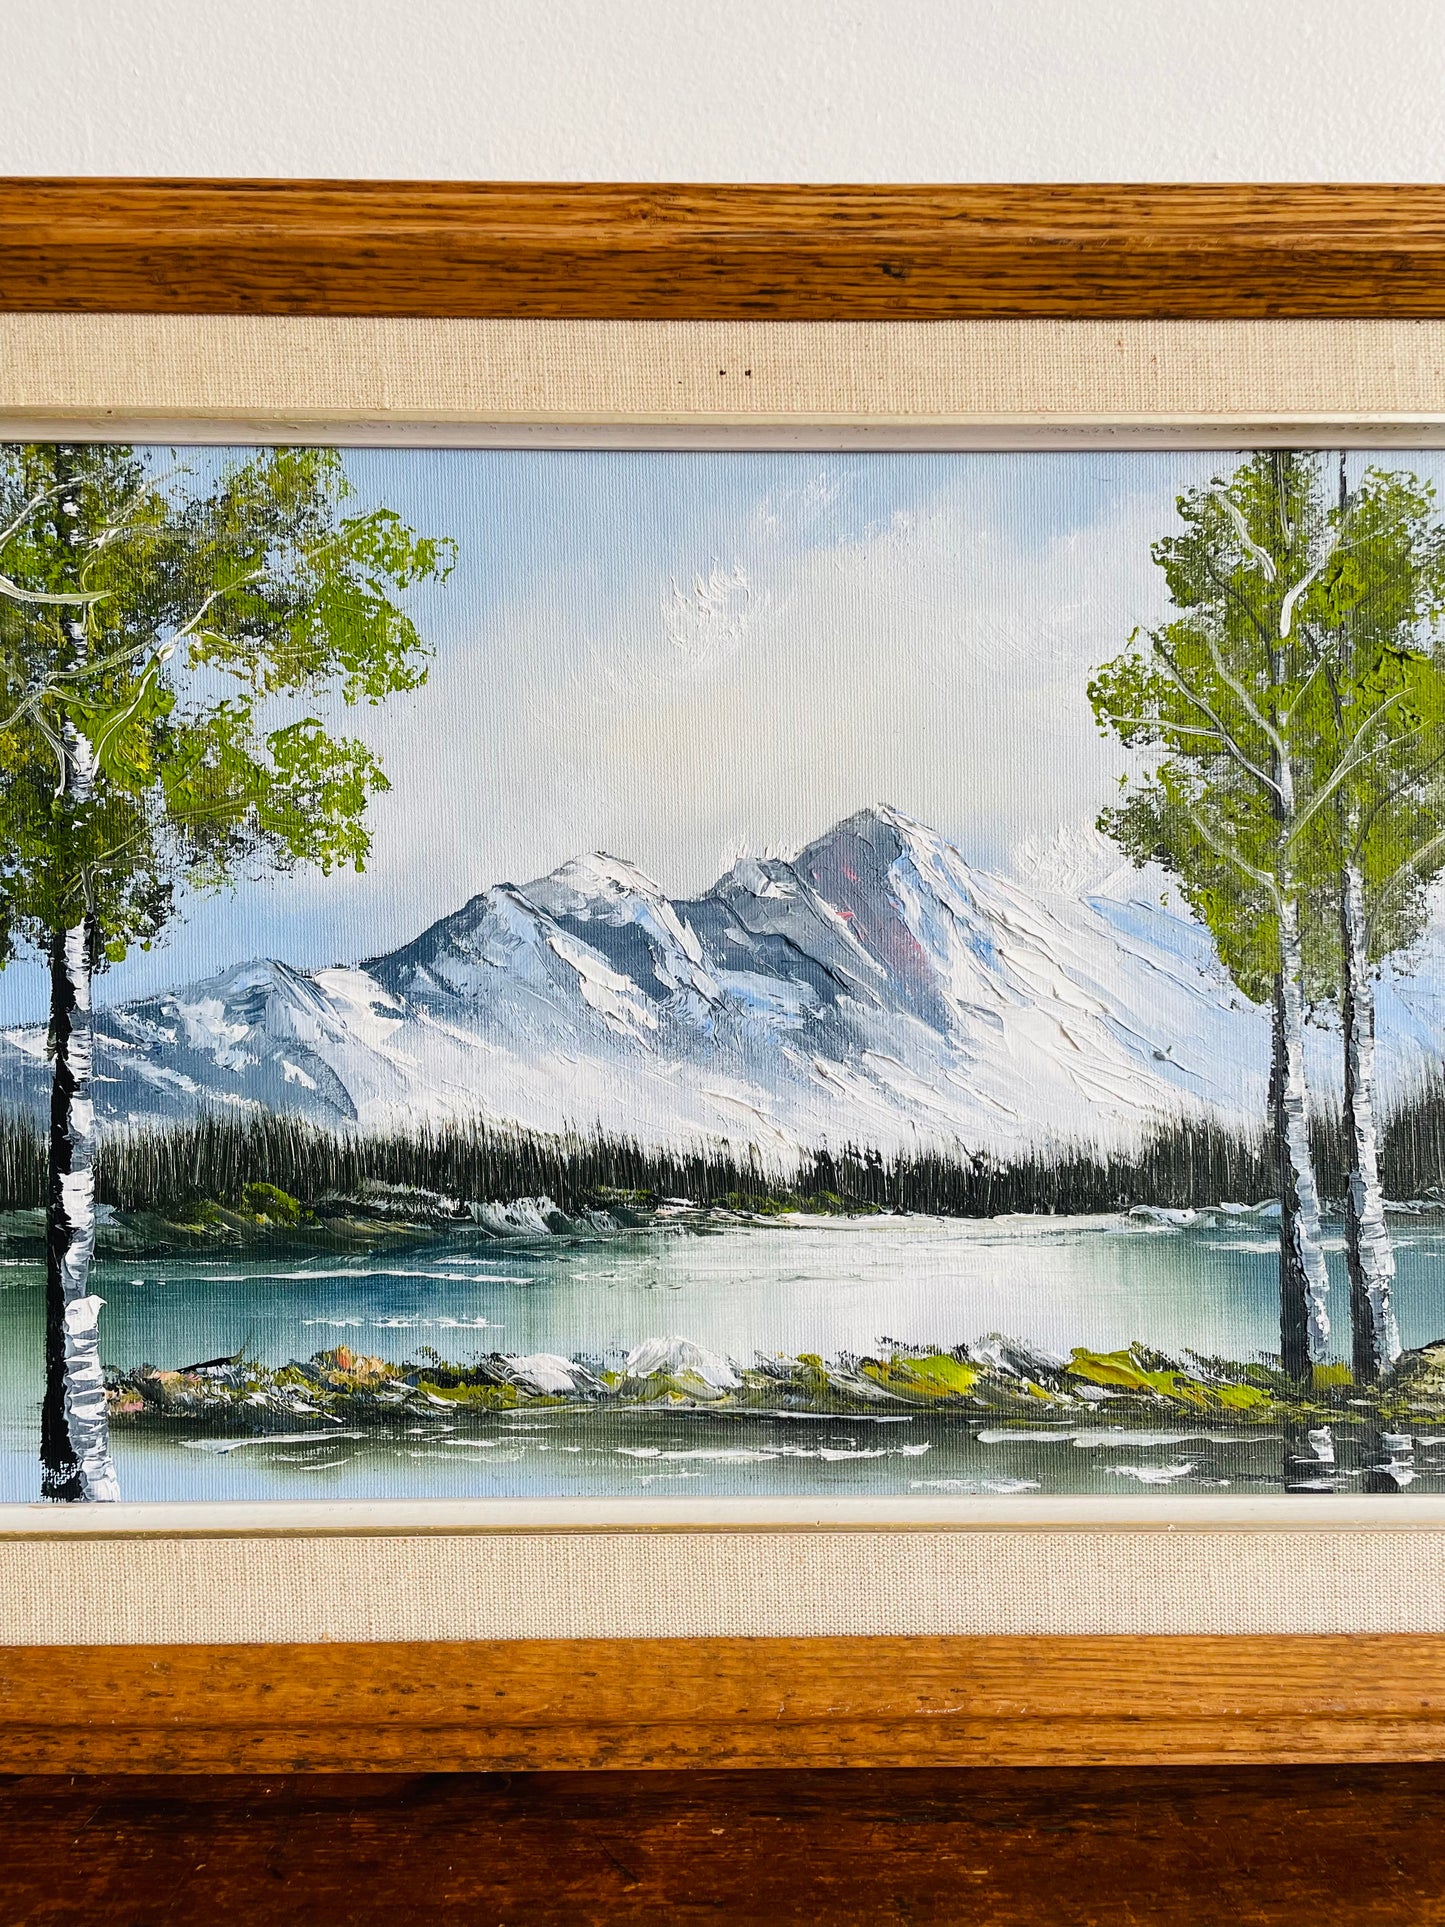 Original Art - Large Landscape Painting of Snowy Mountains Overlooking Lake - Artist Signed